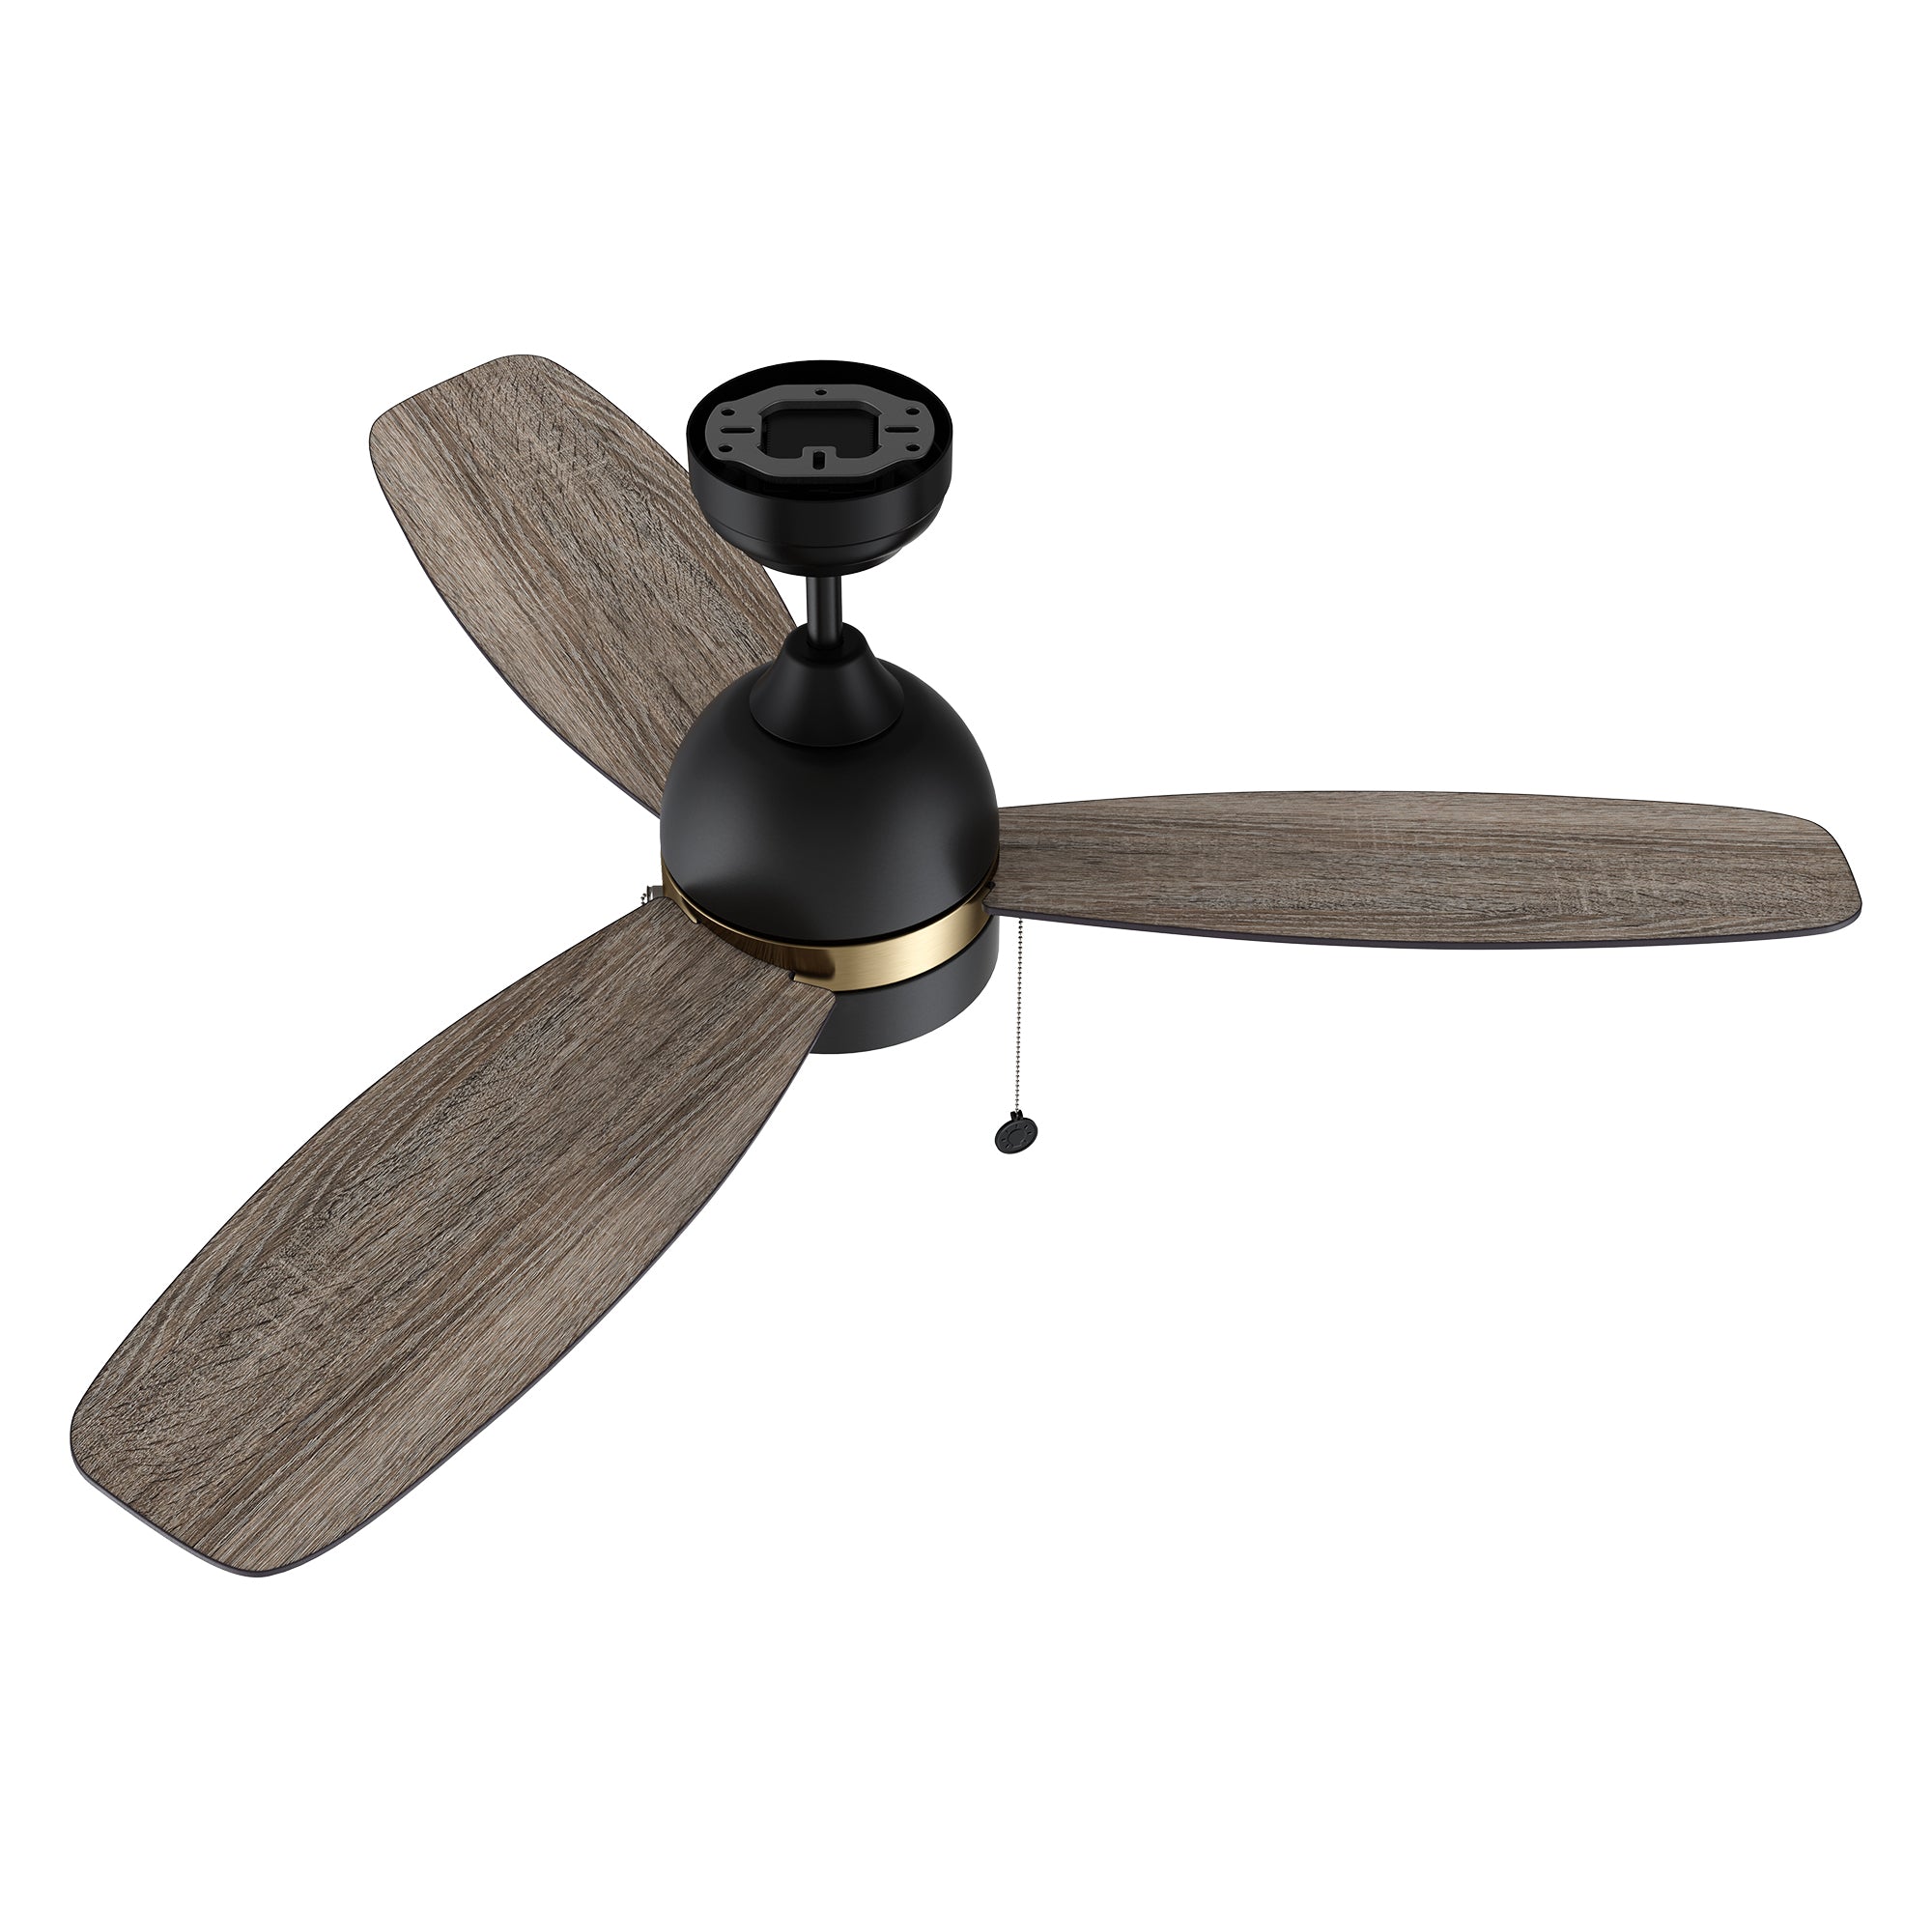 Striking and natural light wood finish on the fan blades. Enhances the Carro Tesoro pull chain ceiling fan's overall aesthetic with a touch of warmth and sophistication. #color_Dark-Wood